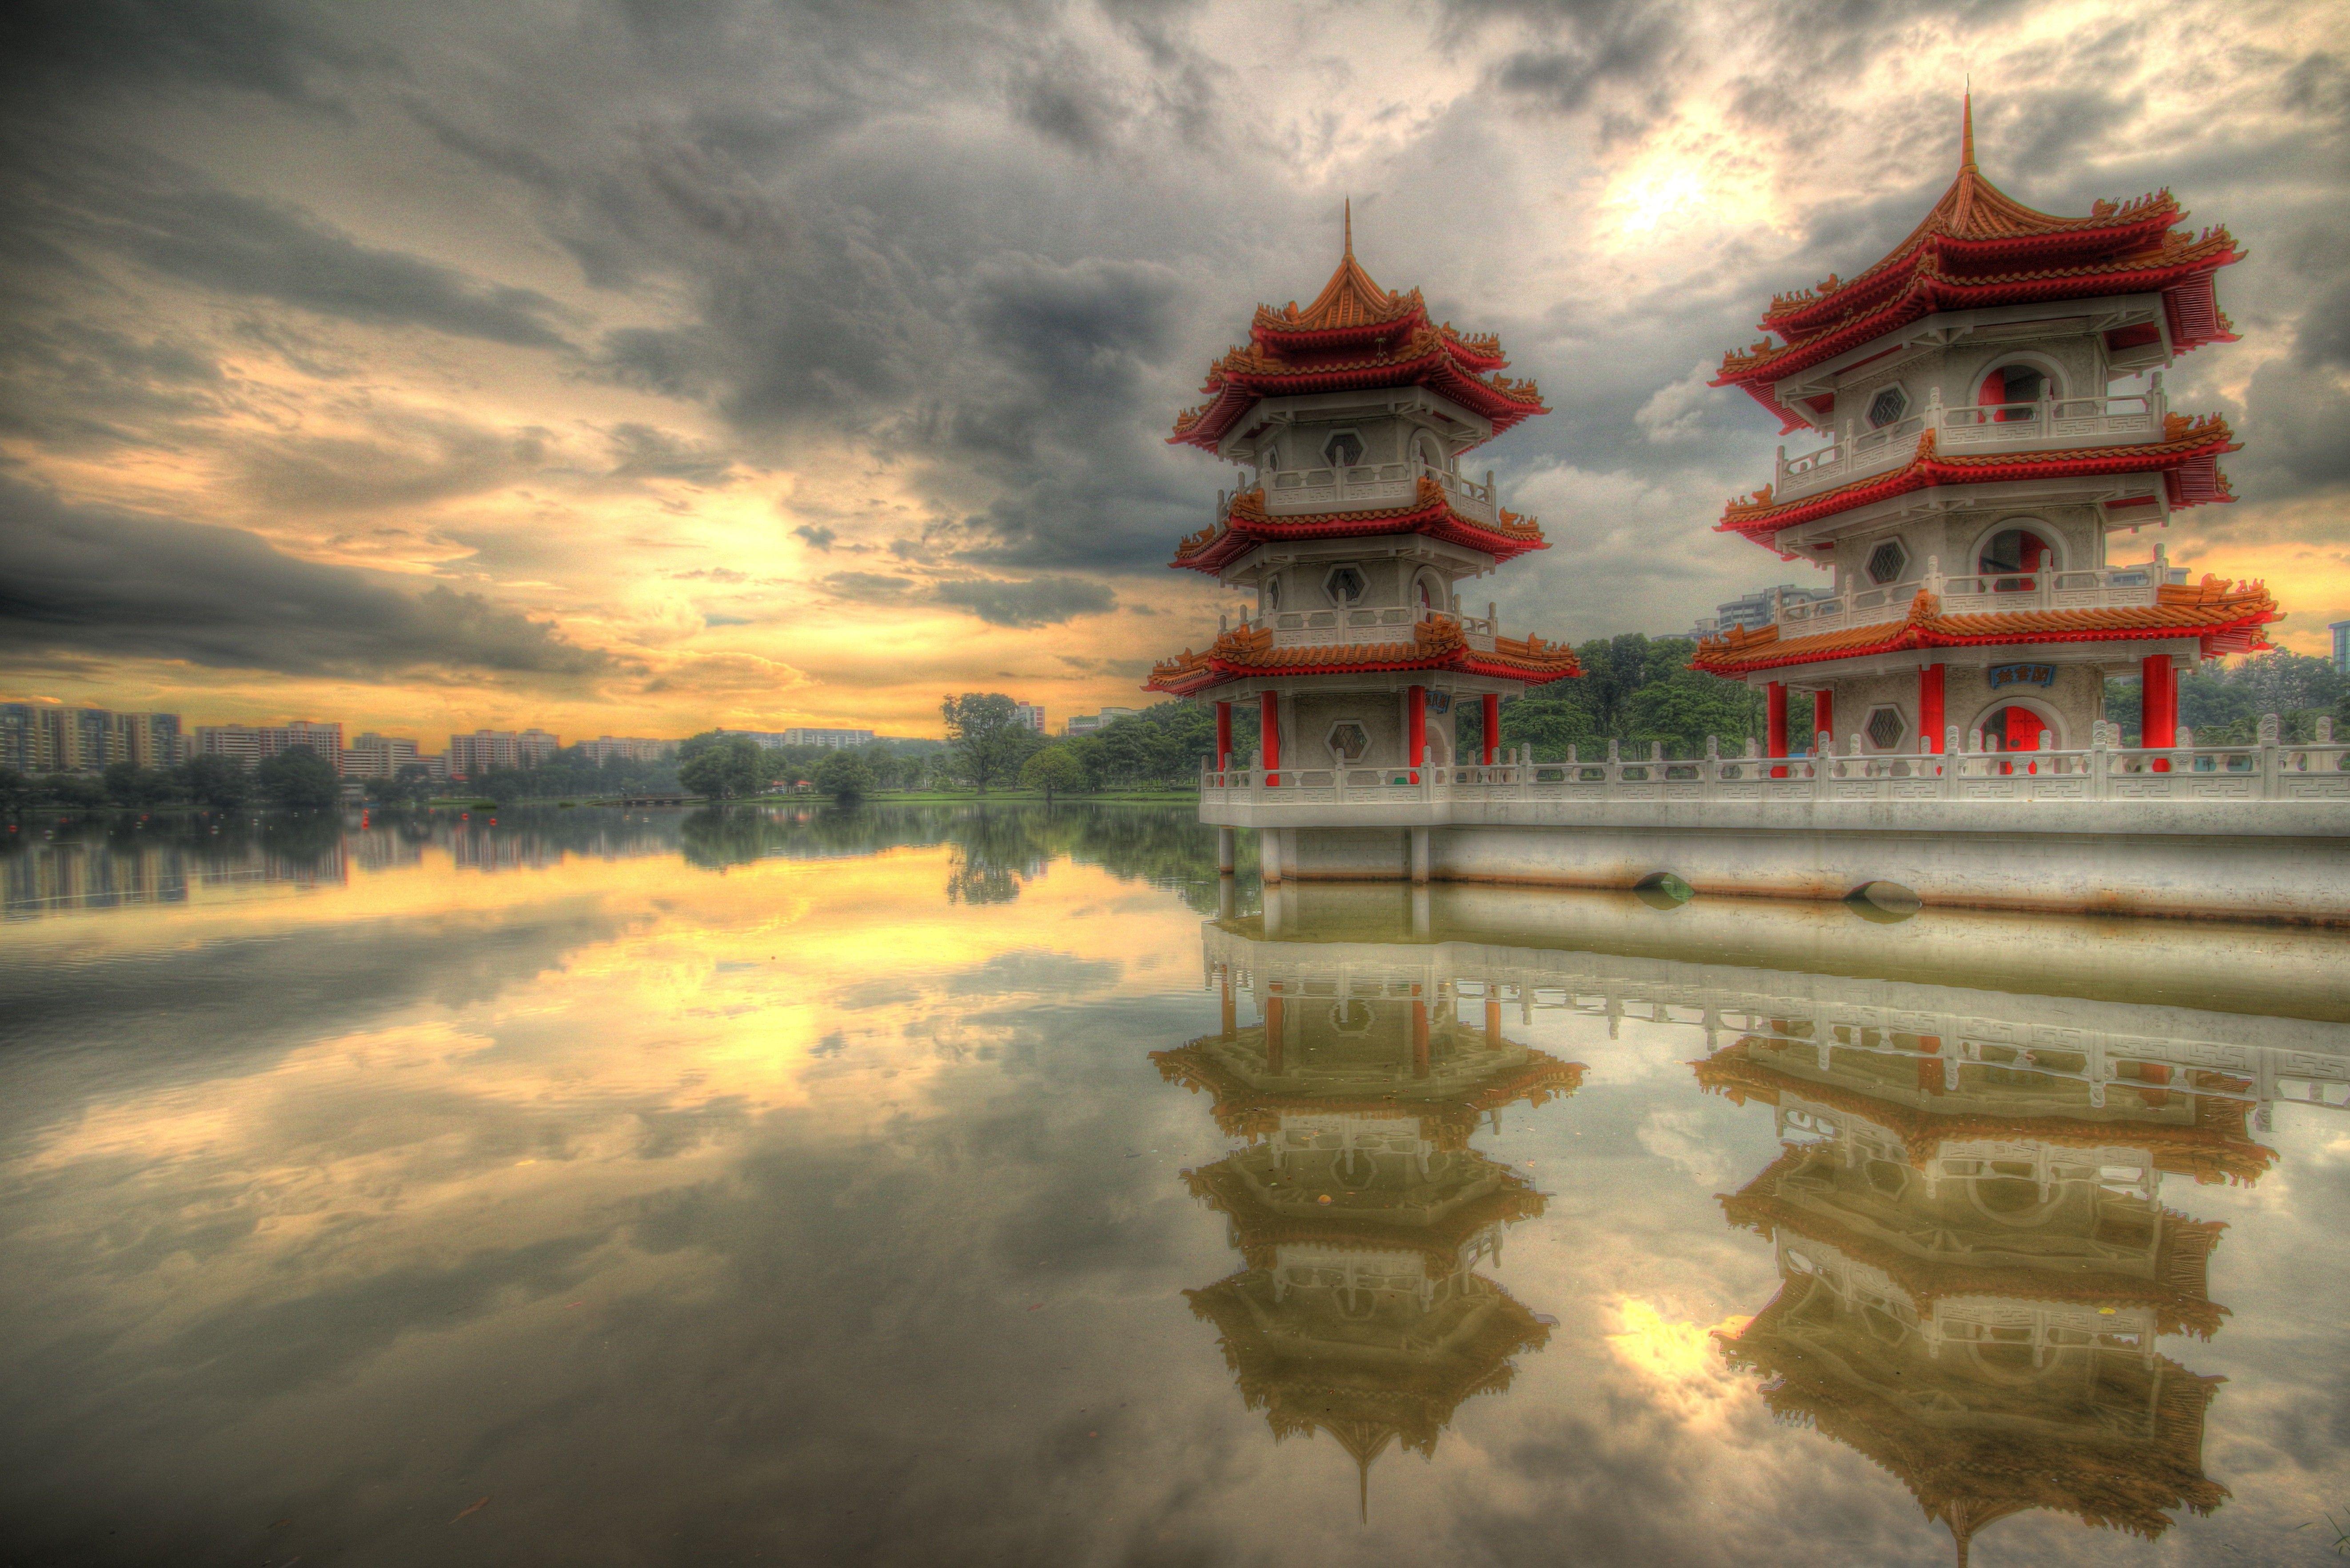 Singapore, Sunset, Pagoda, Lake, Water, Clouds, Reflection, Feelings, Peaceful Wallpaper HD / Desktop and Mobile Background